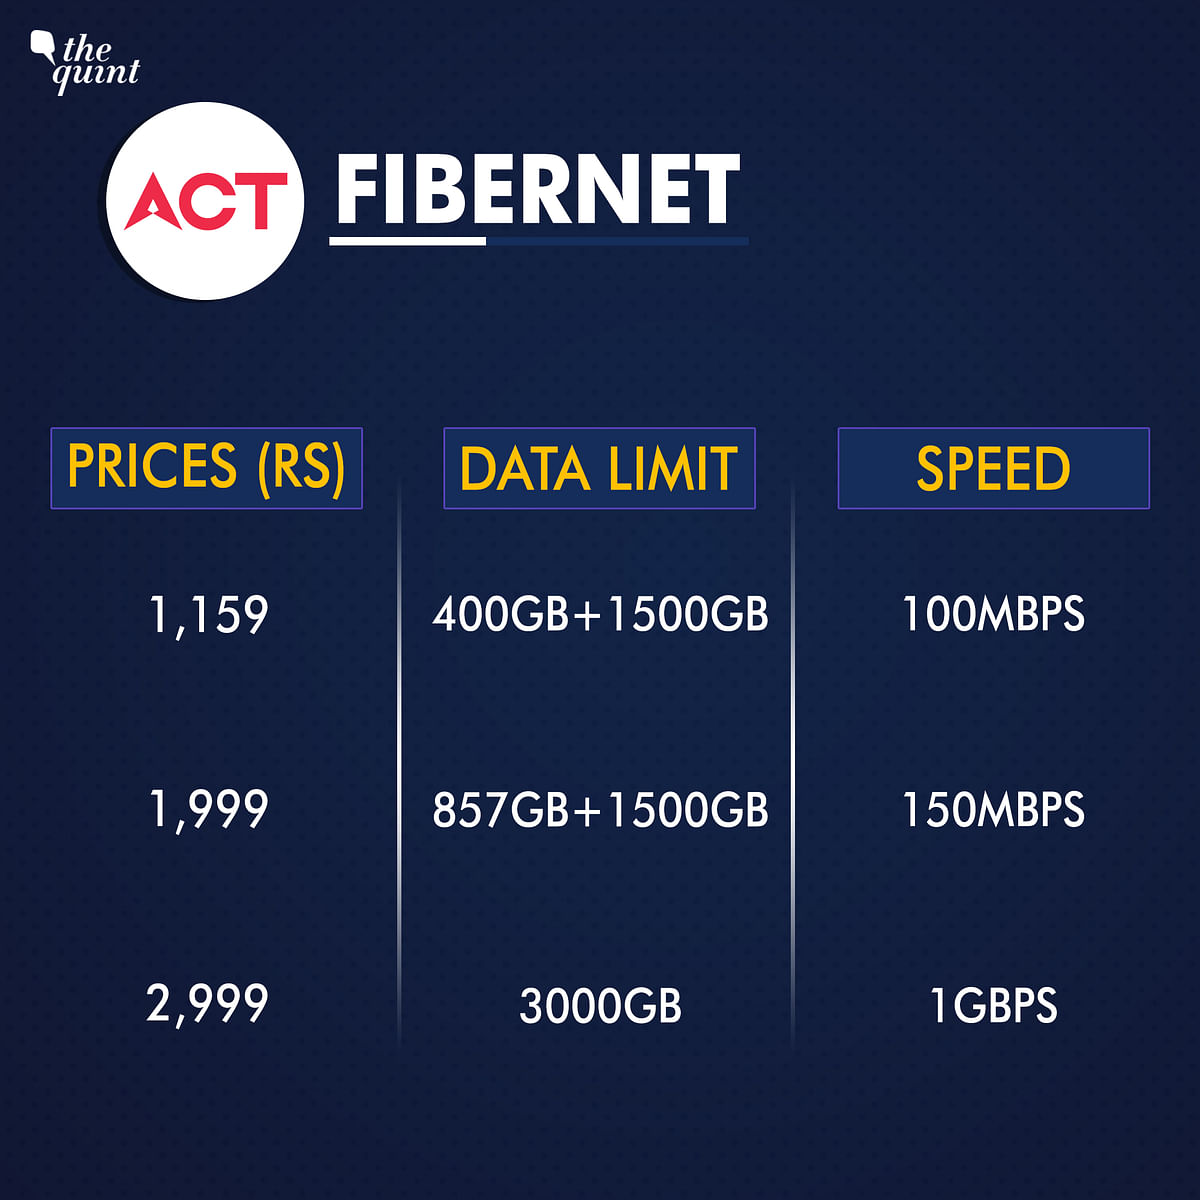 The broadband plans available for consumers offer high speed internet, more data usage and special benefits as well.